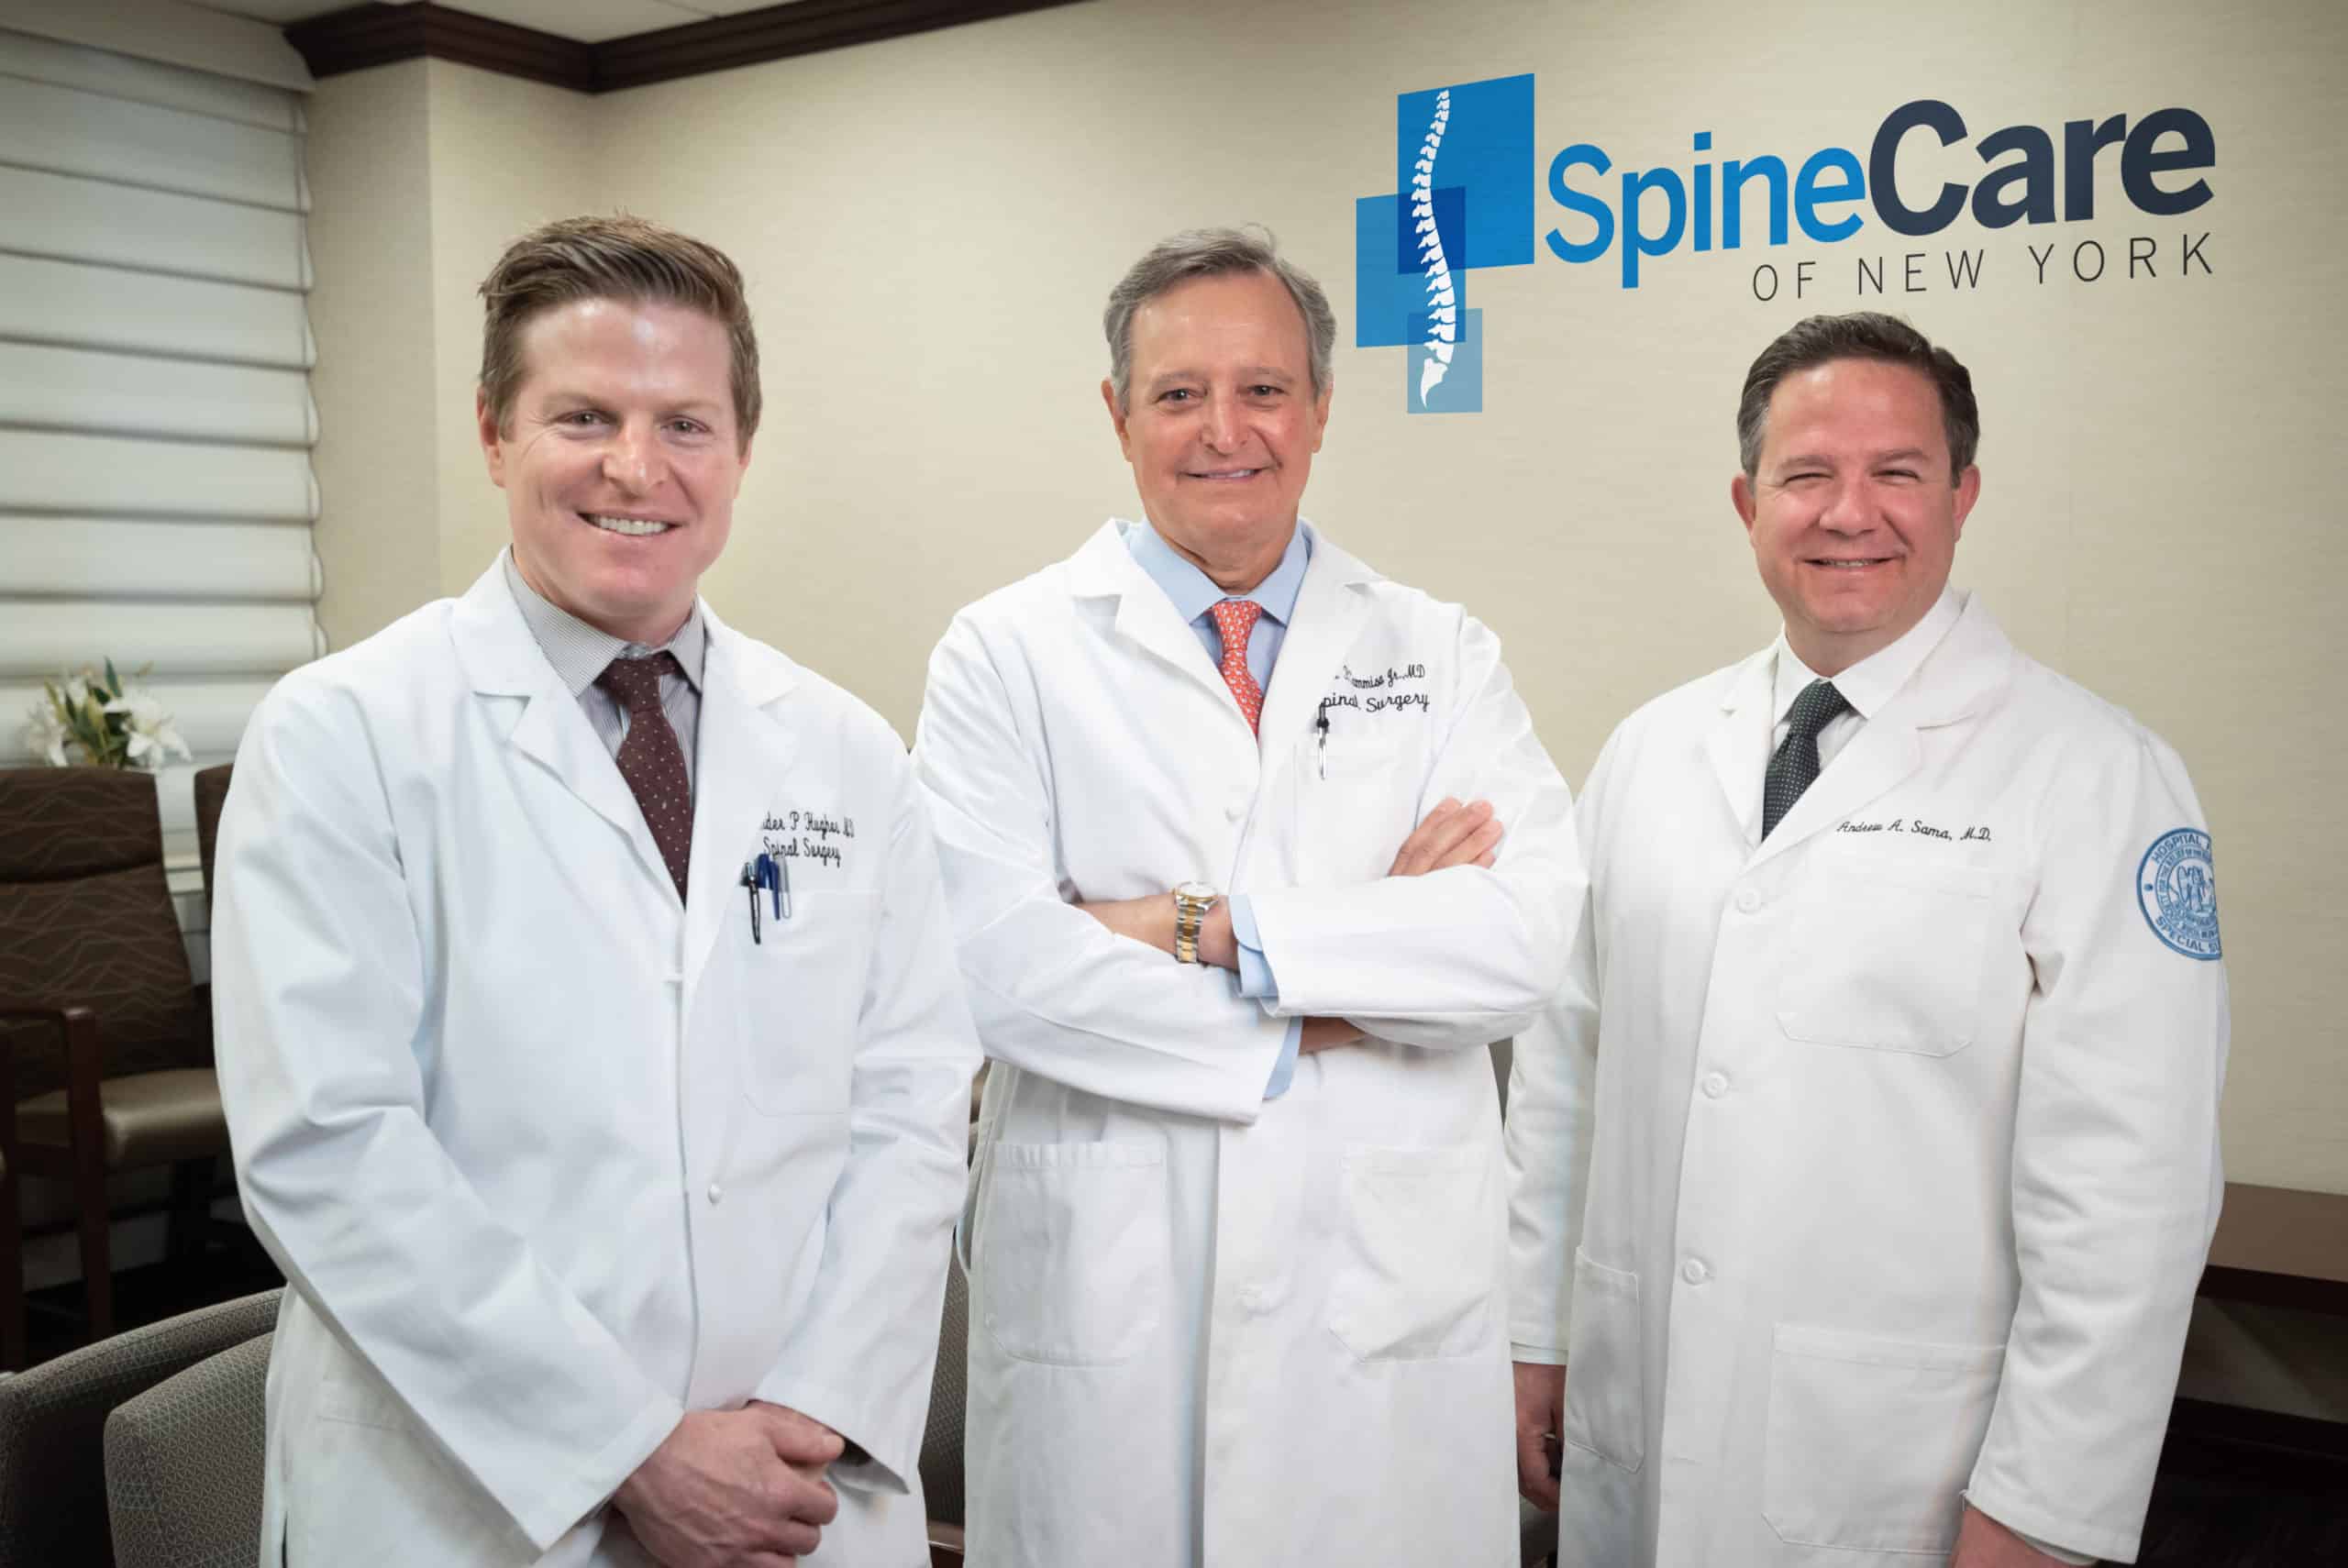 Drs. Hughes, Cammisa, and Sama - Orthopedic Surgeons at SpineCare of NY - in office with logo behind them